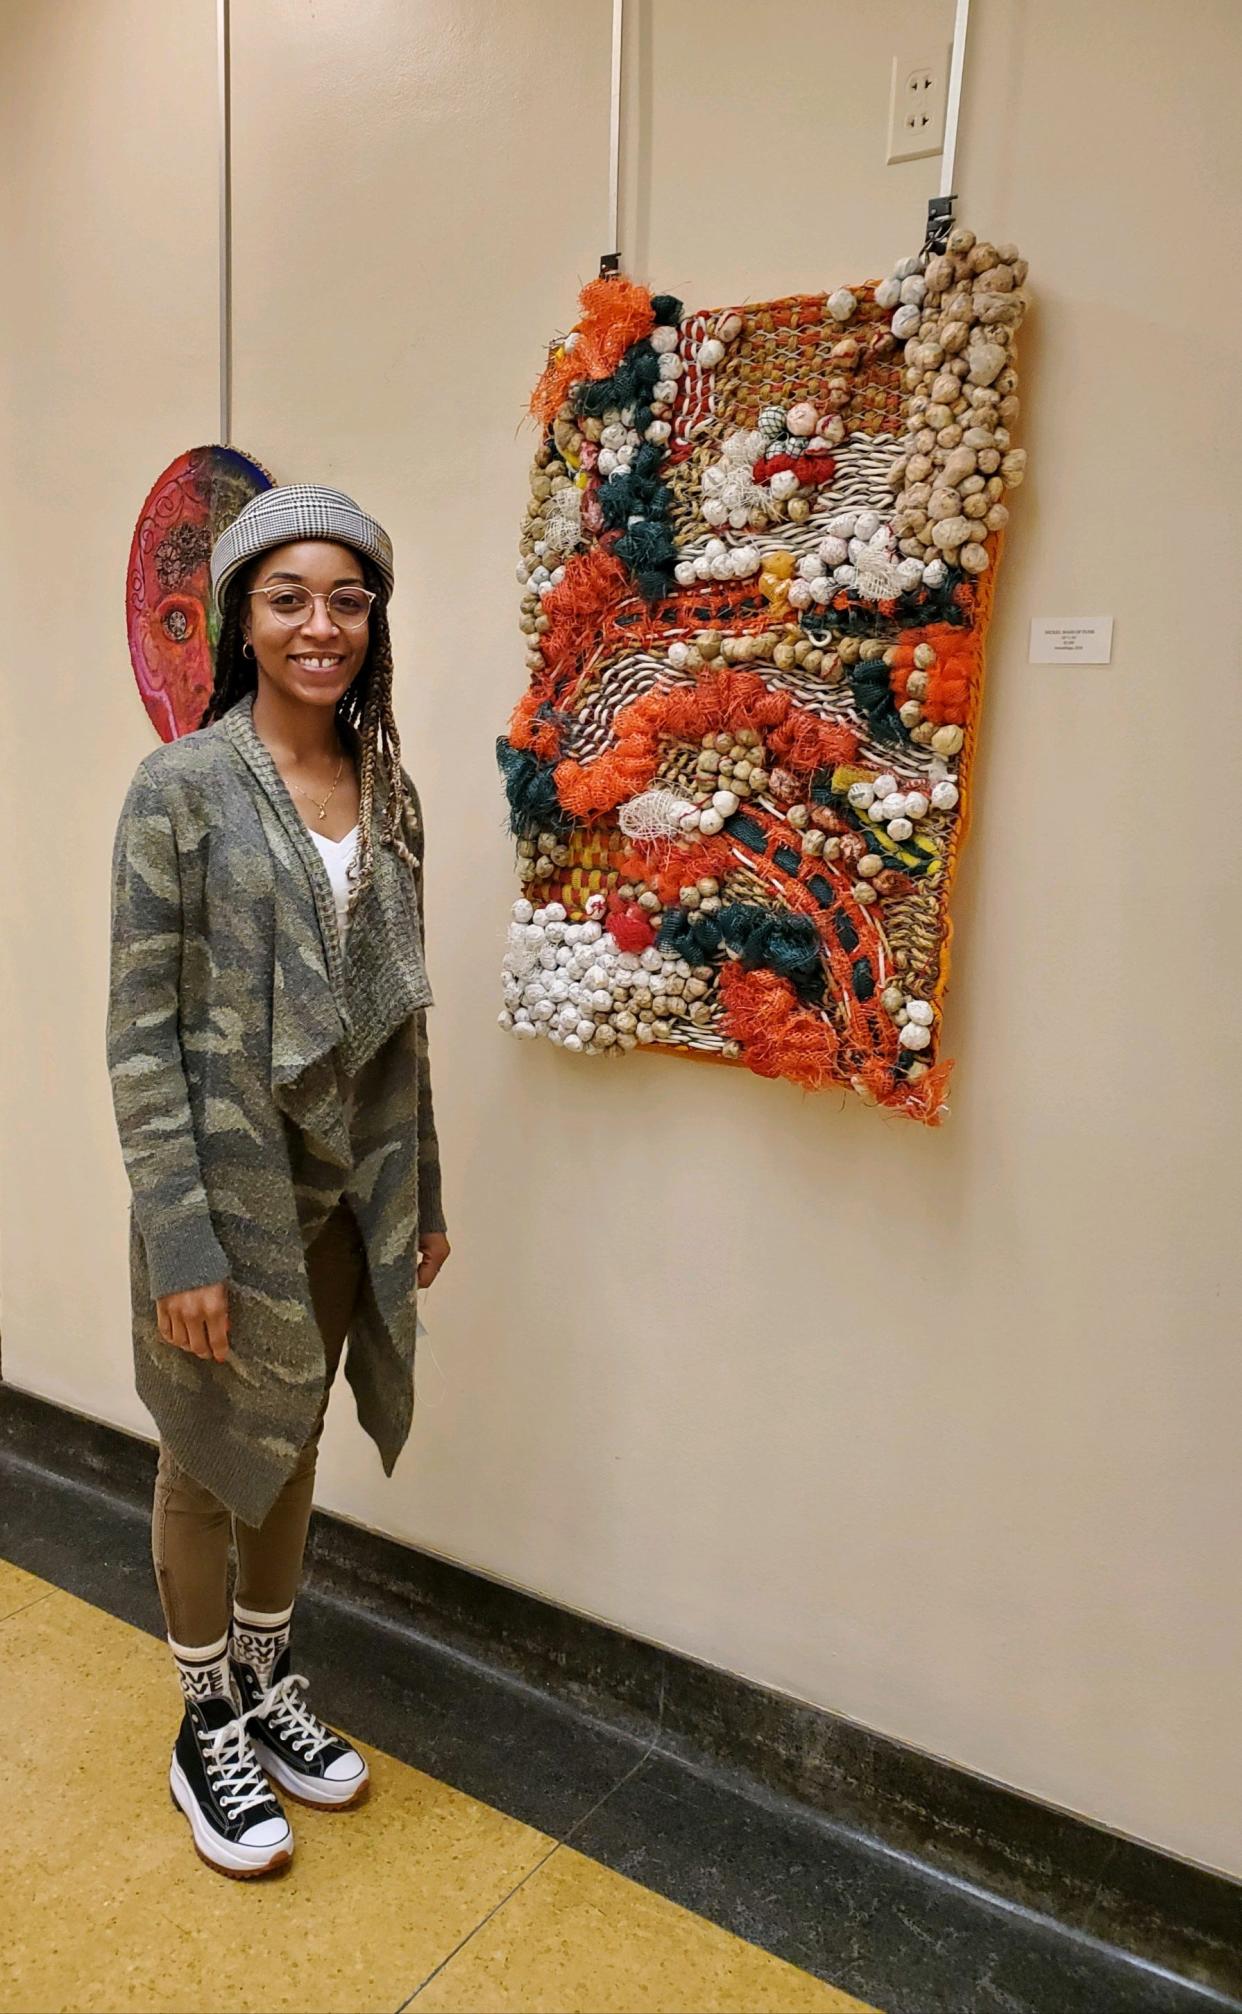 Artist Tiffany Lawson shows a piece of her collection titled “Nickel Bags of Funk.”